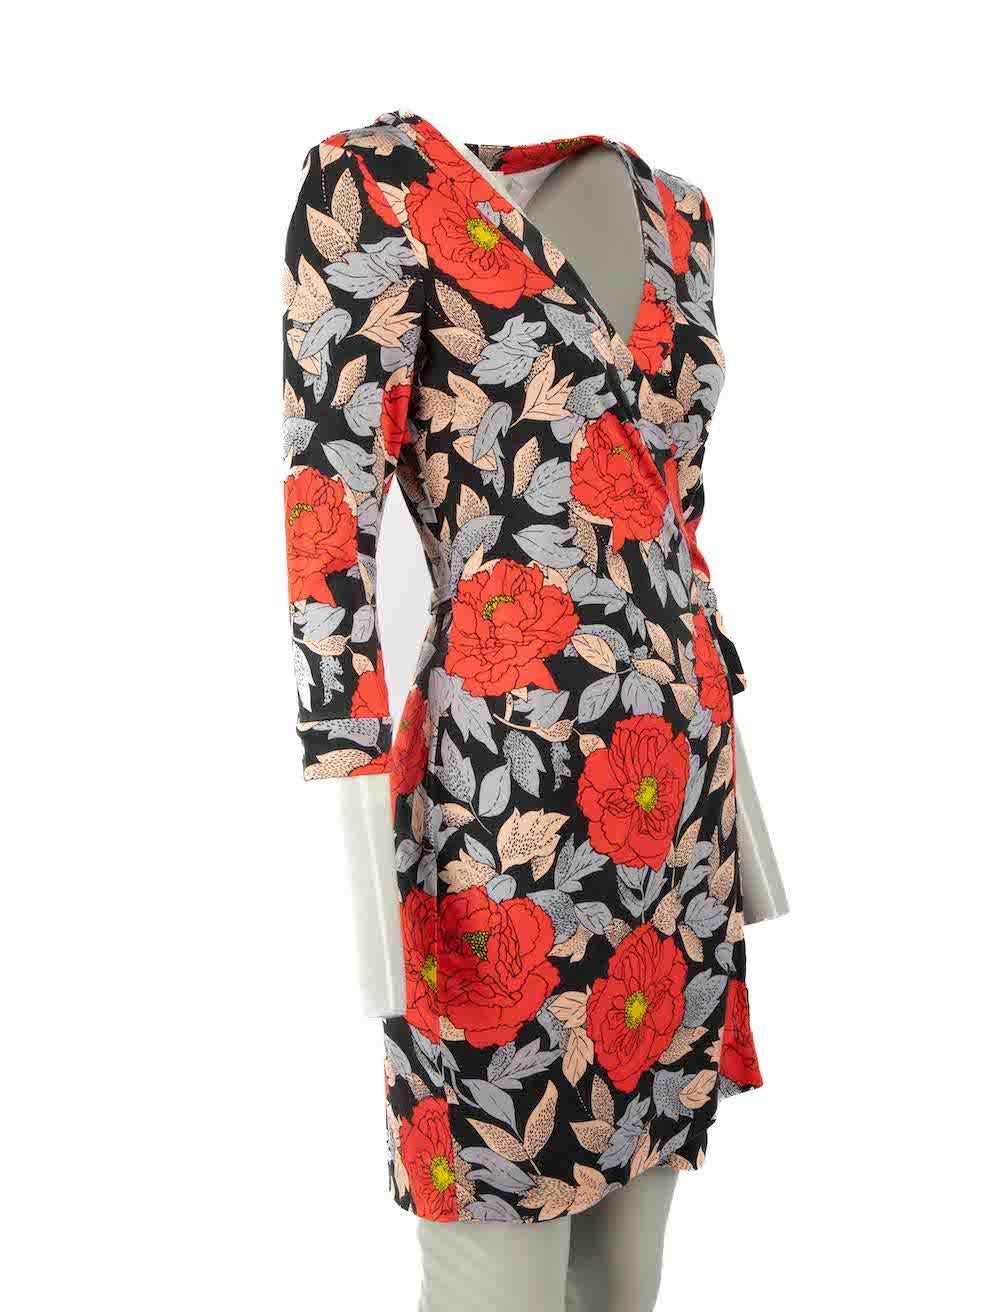 CONDITION is Very good. Minimal wear to dress is evident. Minimal wear to the right sleeve with tiny mark on this used Diane Von Furstenberg designer resale item.
 
 Details
 Multicolour
 Silk
 Mini wrap dress
 Floral print pattern
 V neckline
 Tie